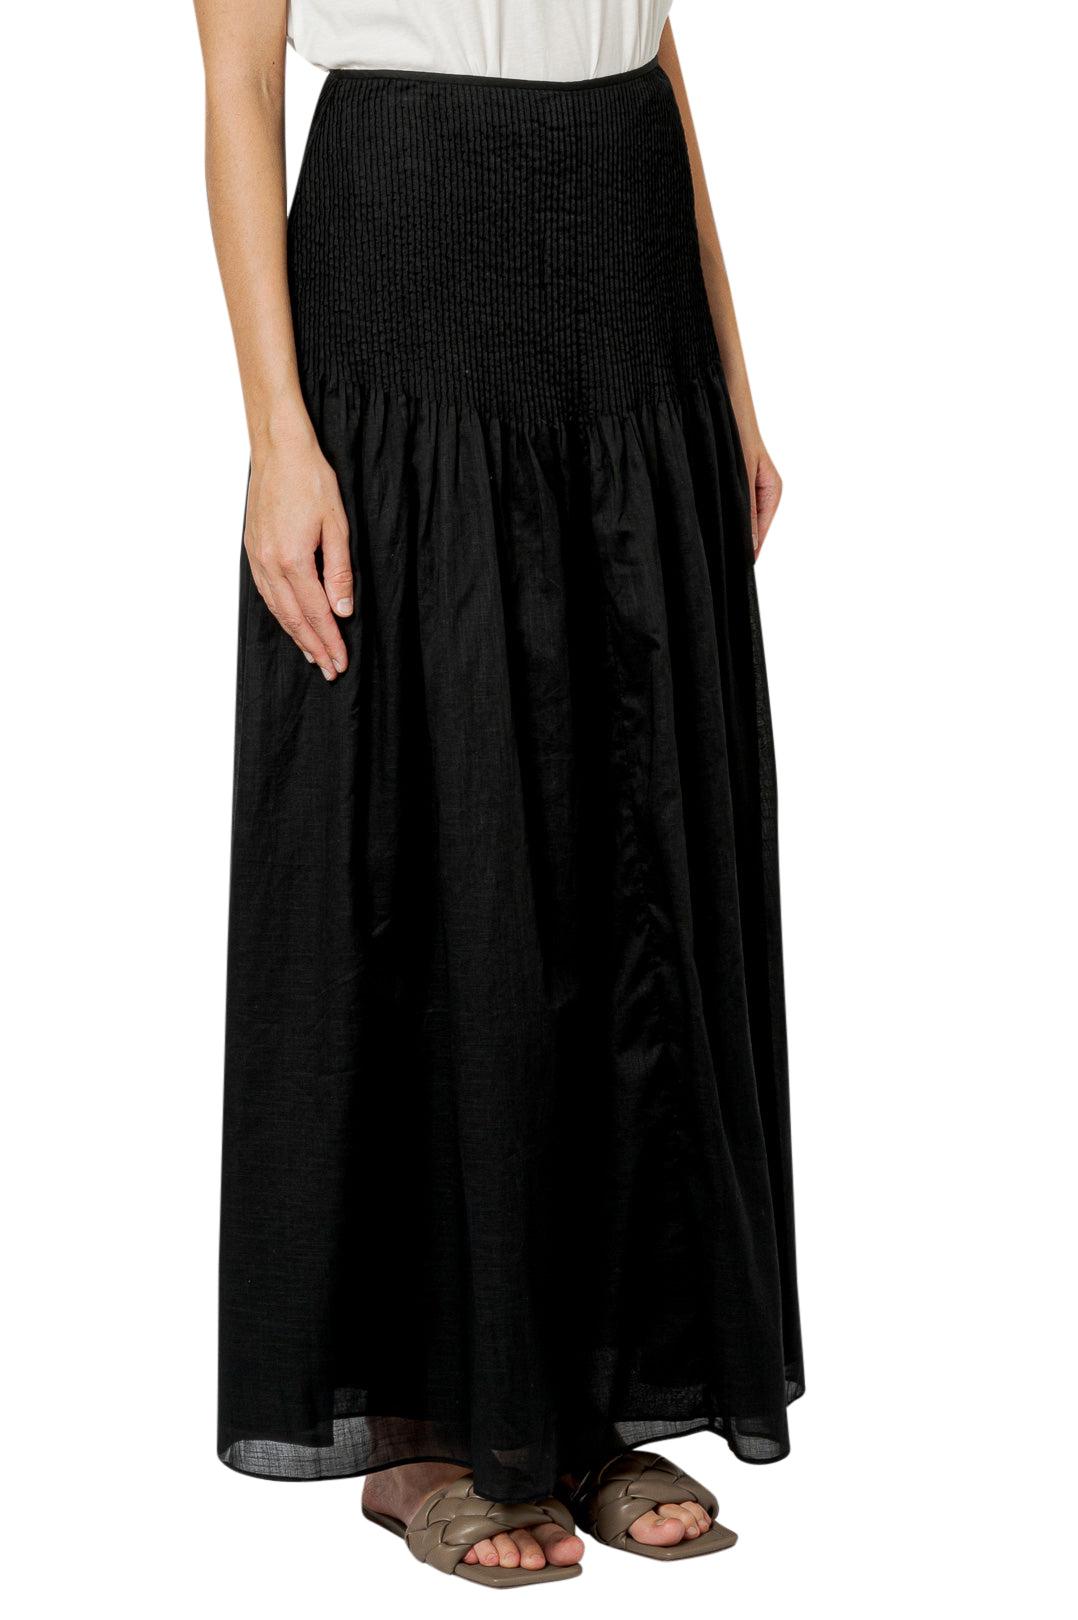 Sir The Label-Flared long skirt-SIR420-3021-dgallerystore